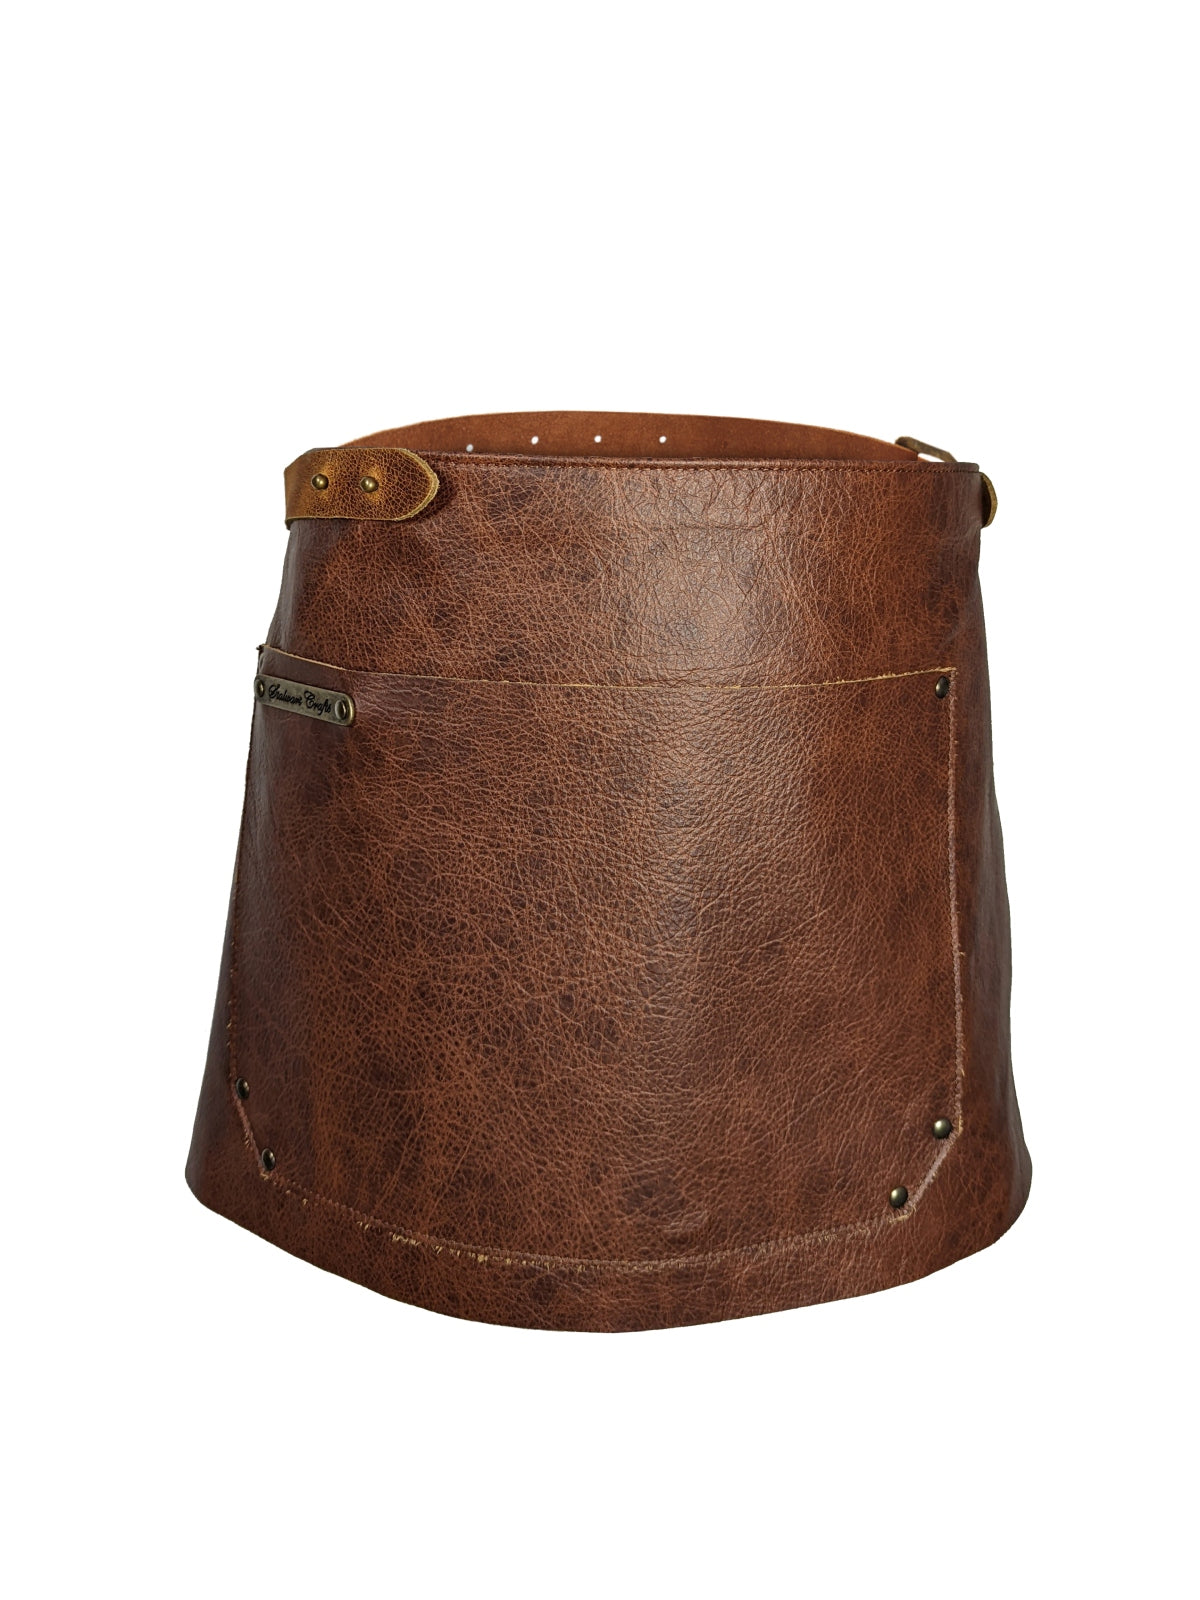 Leather Waist Apron Deluxe Brown by STW -  ChefsCotton